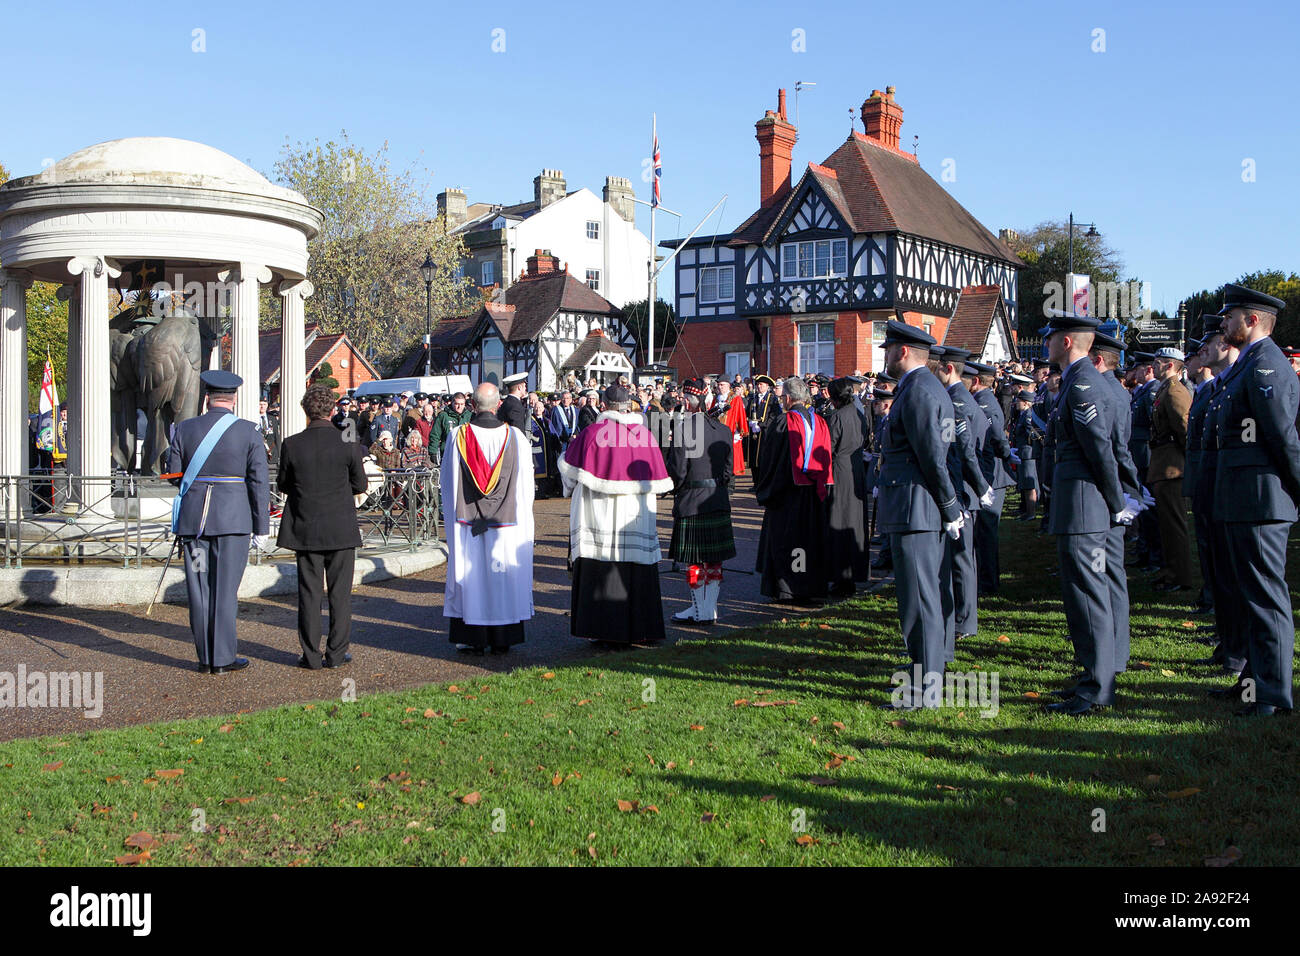 Remembrance Day commemorations in Shrewsbury at The Quarry public park in Shropshire, England. Stock Photo